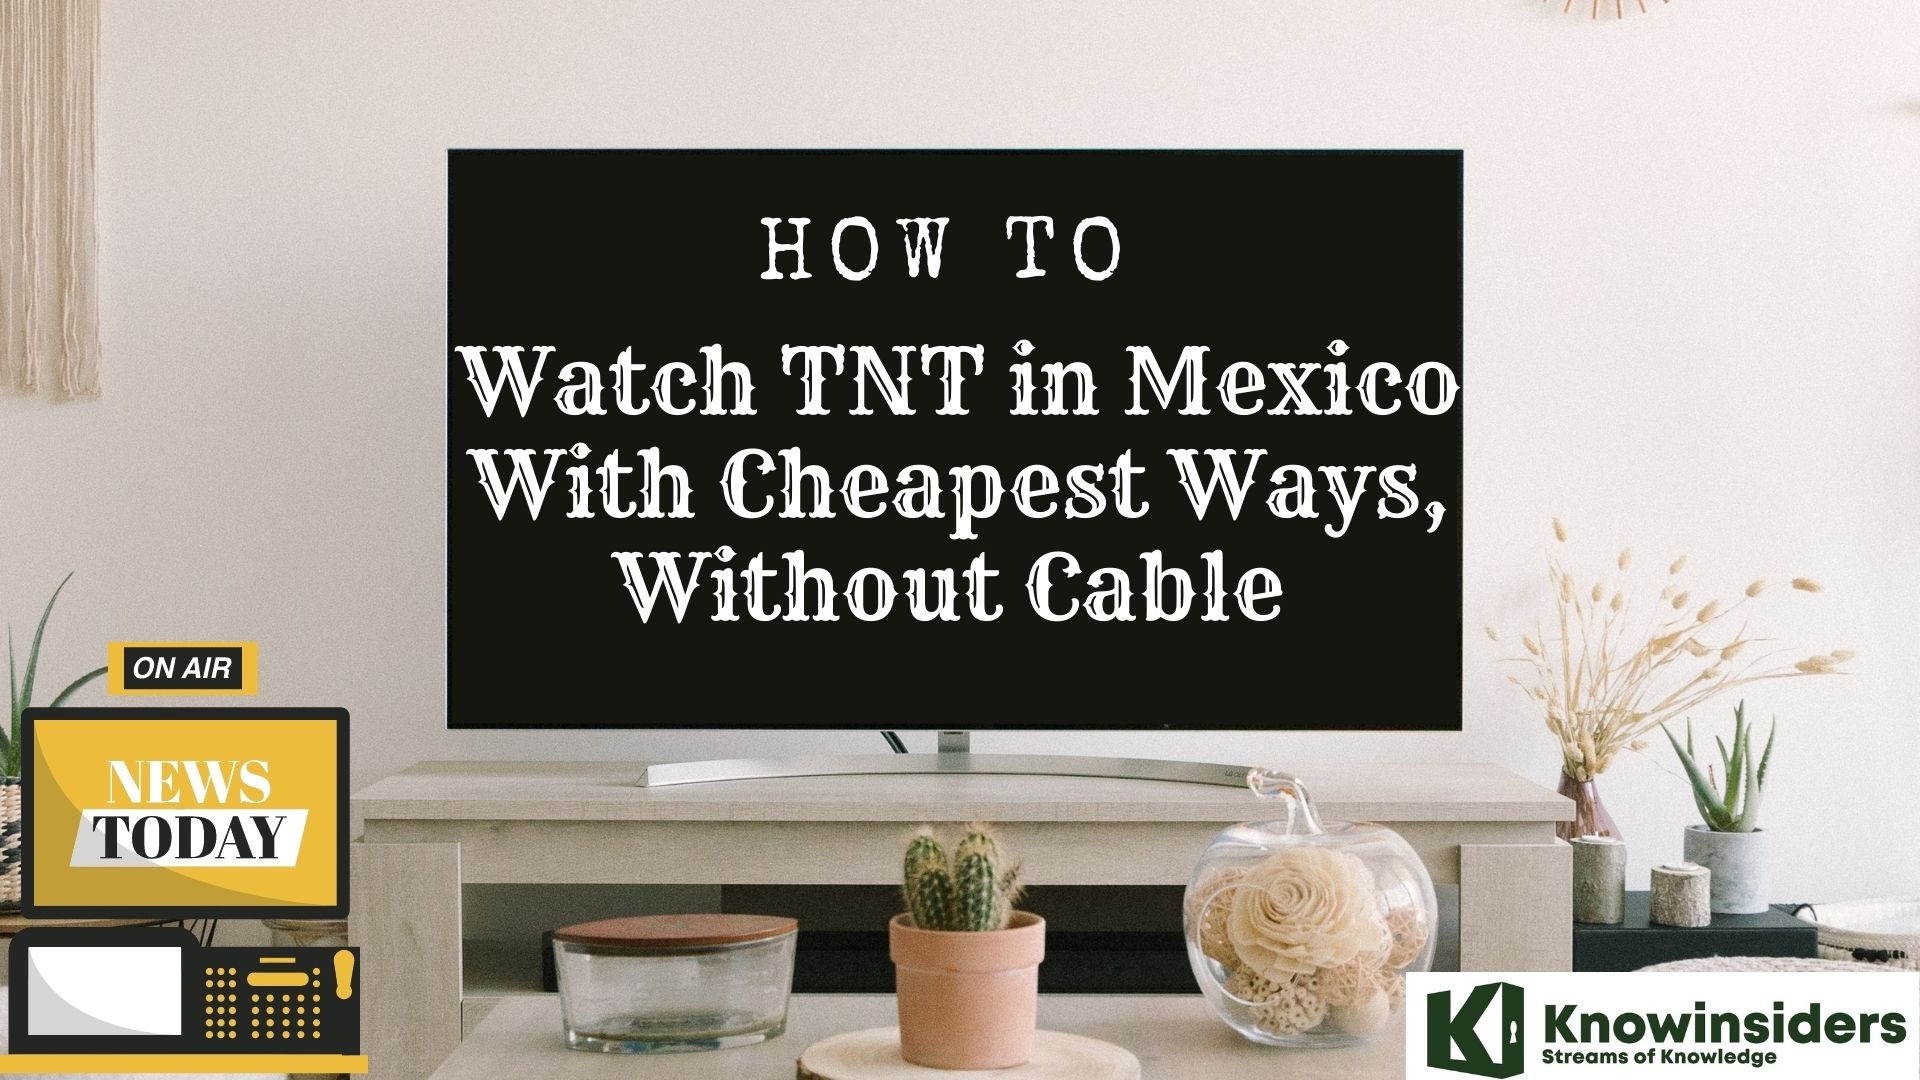 How To Watch TNT in Mexico With Cheapest Ways, Without Cable 